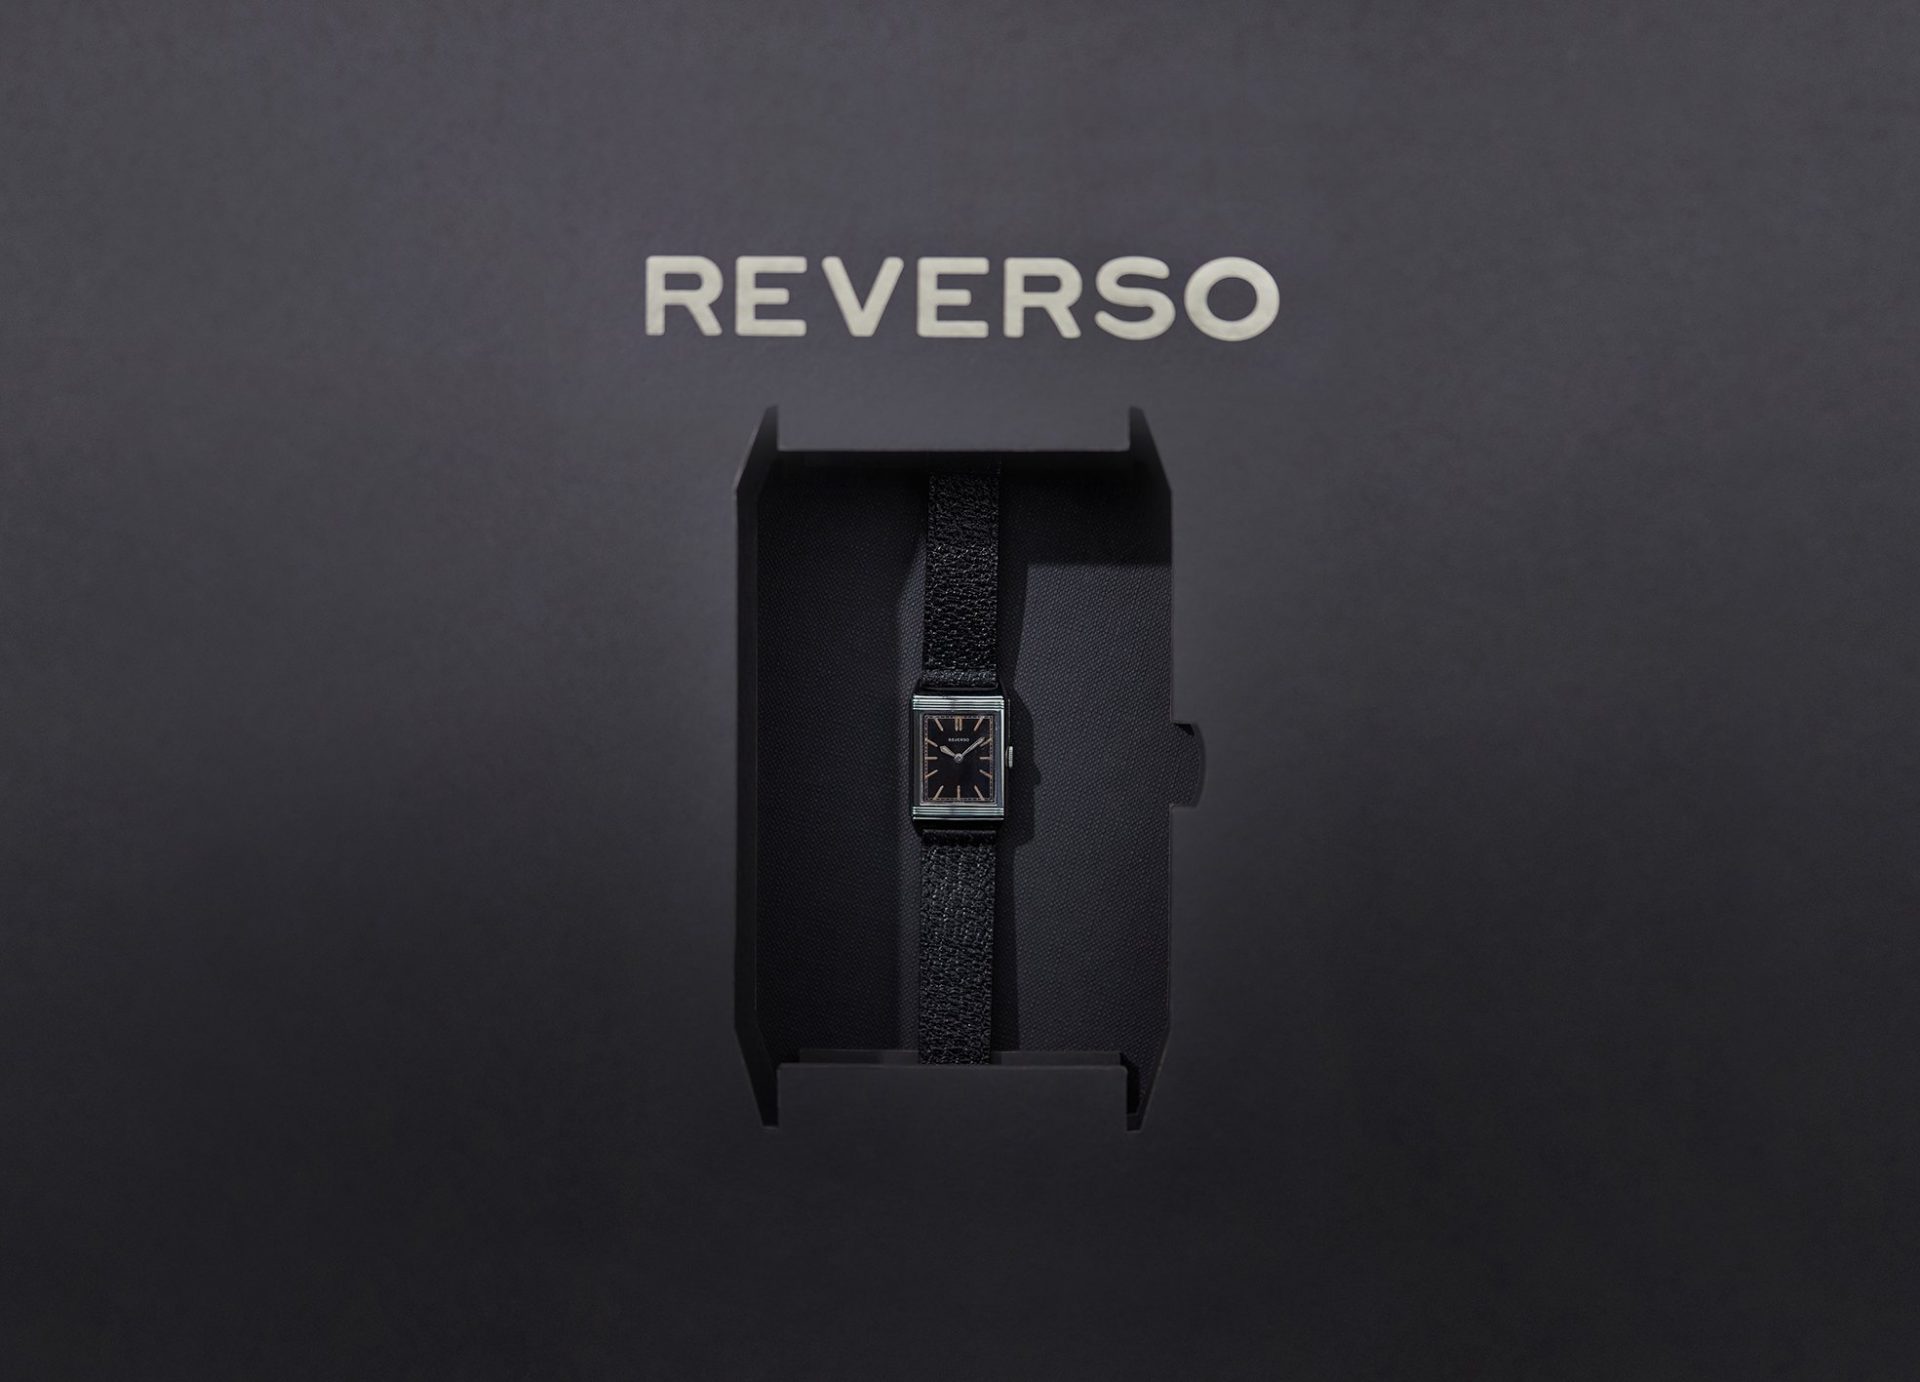 90 year old Jaeger-LeCoultre piece in The Flippin’ History of the Reverso for A Collected Man